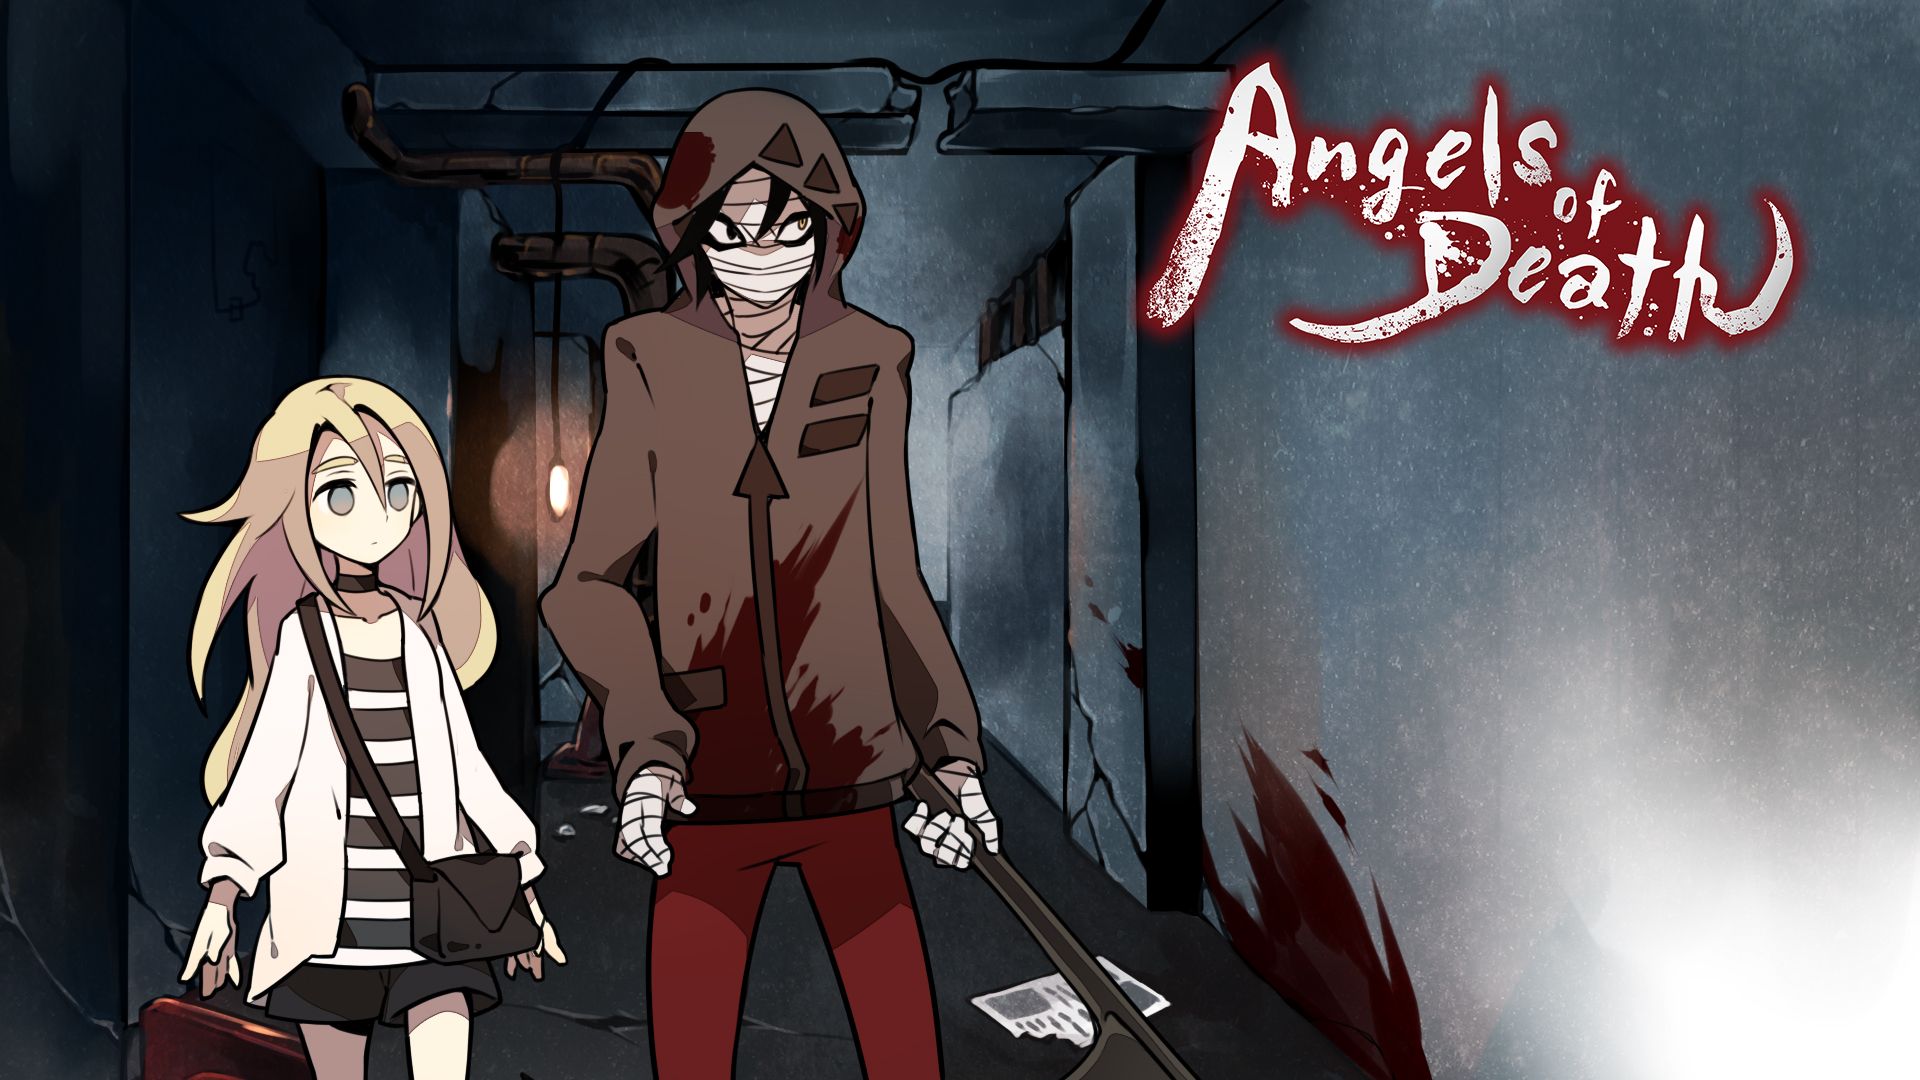 Angels of Death for Nintendo Switch Game Details